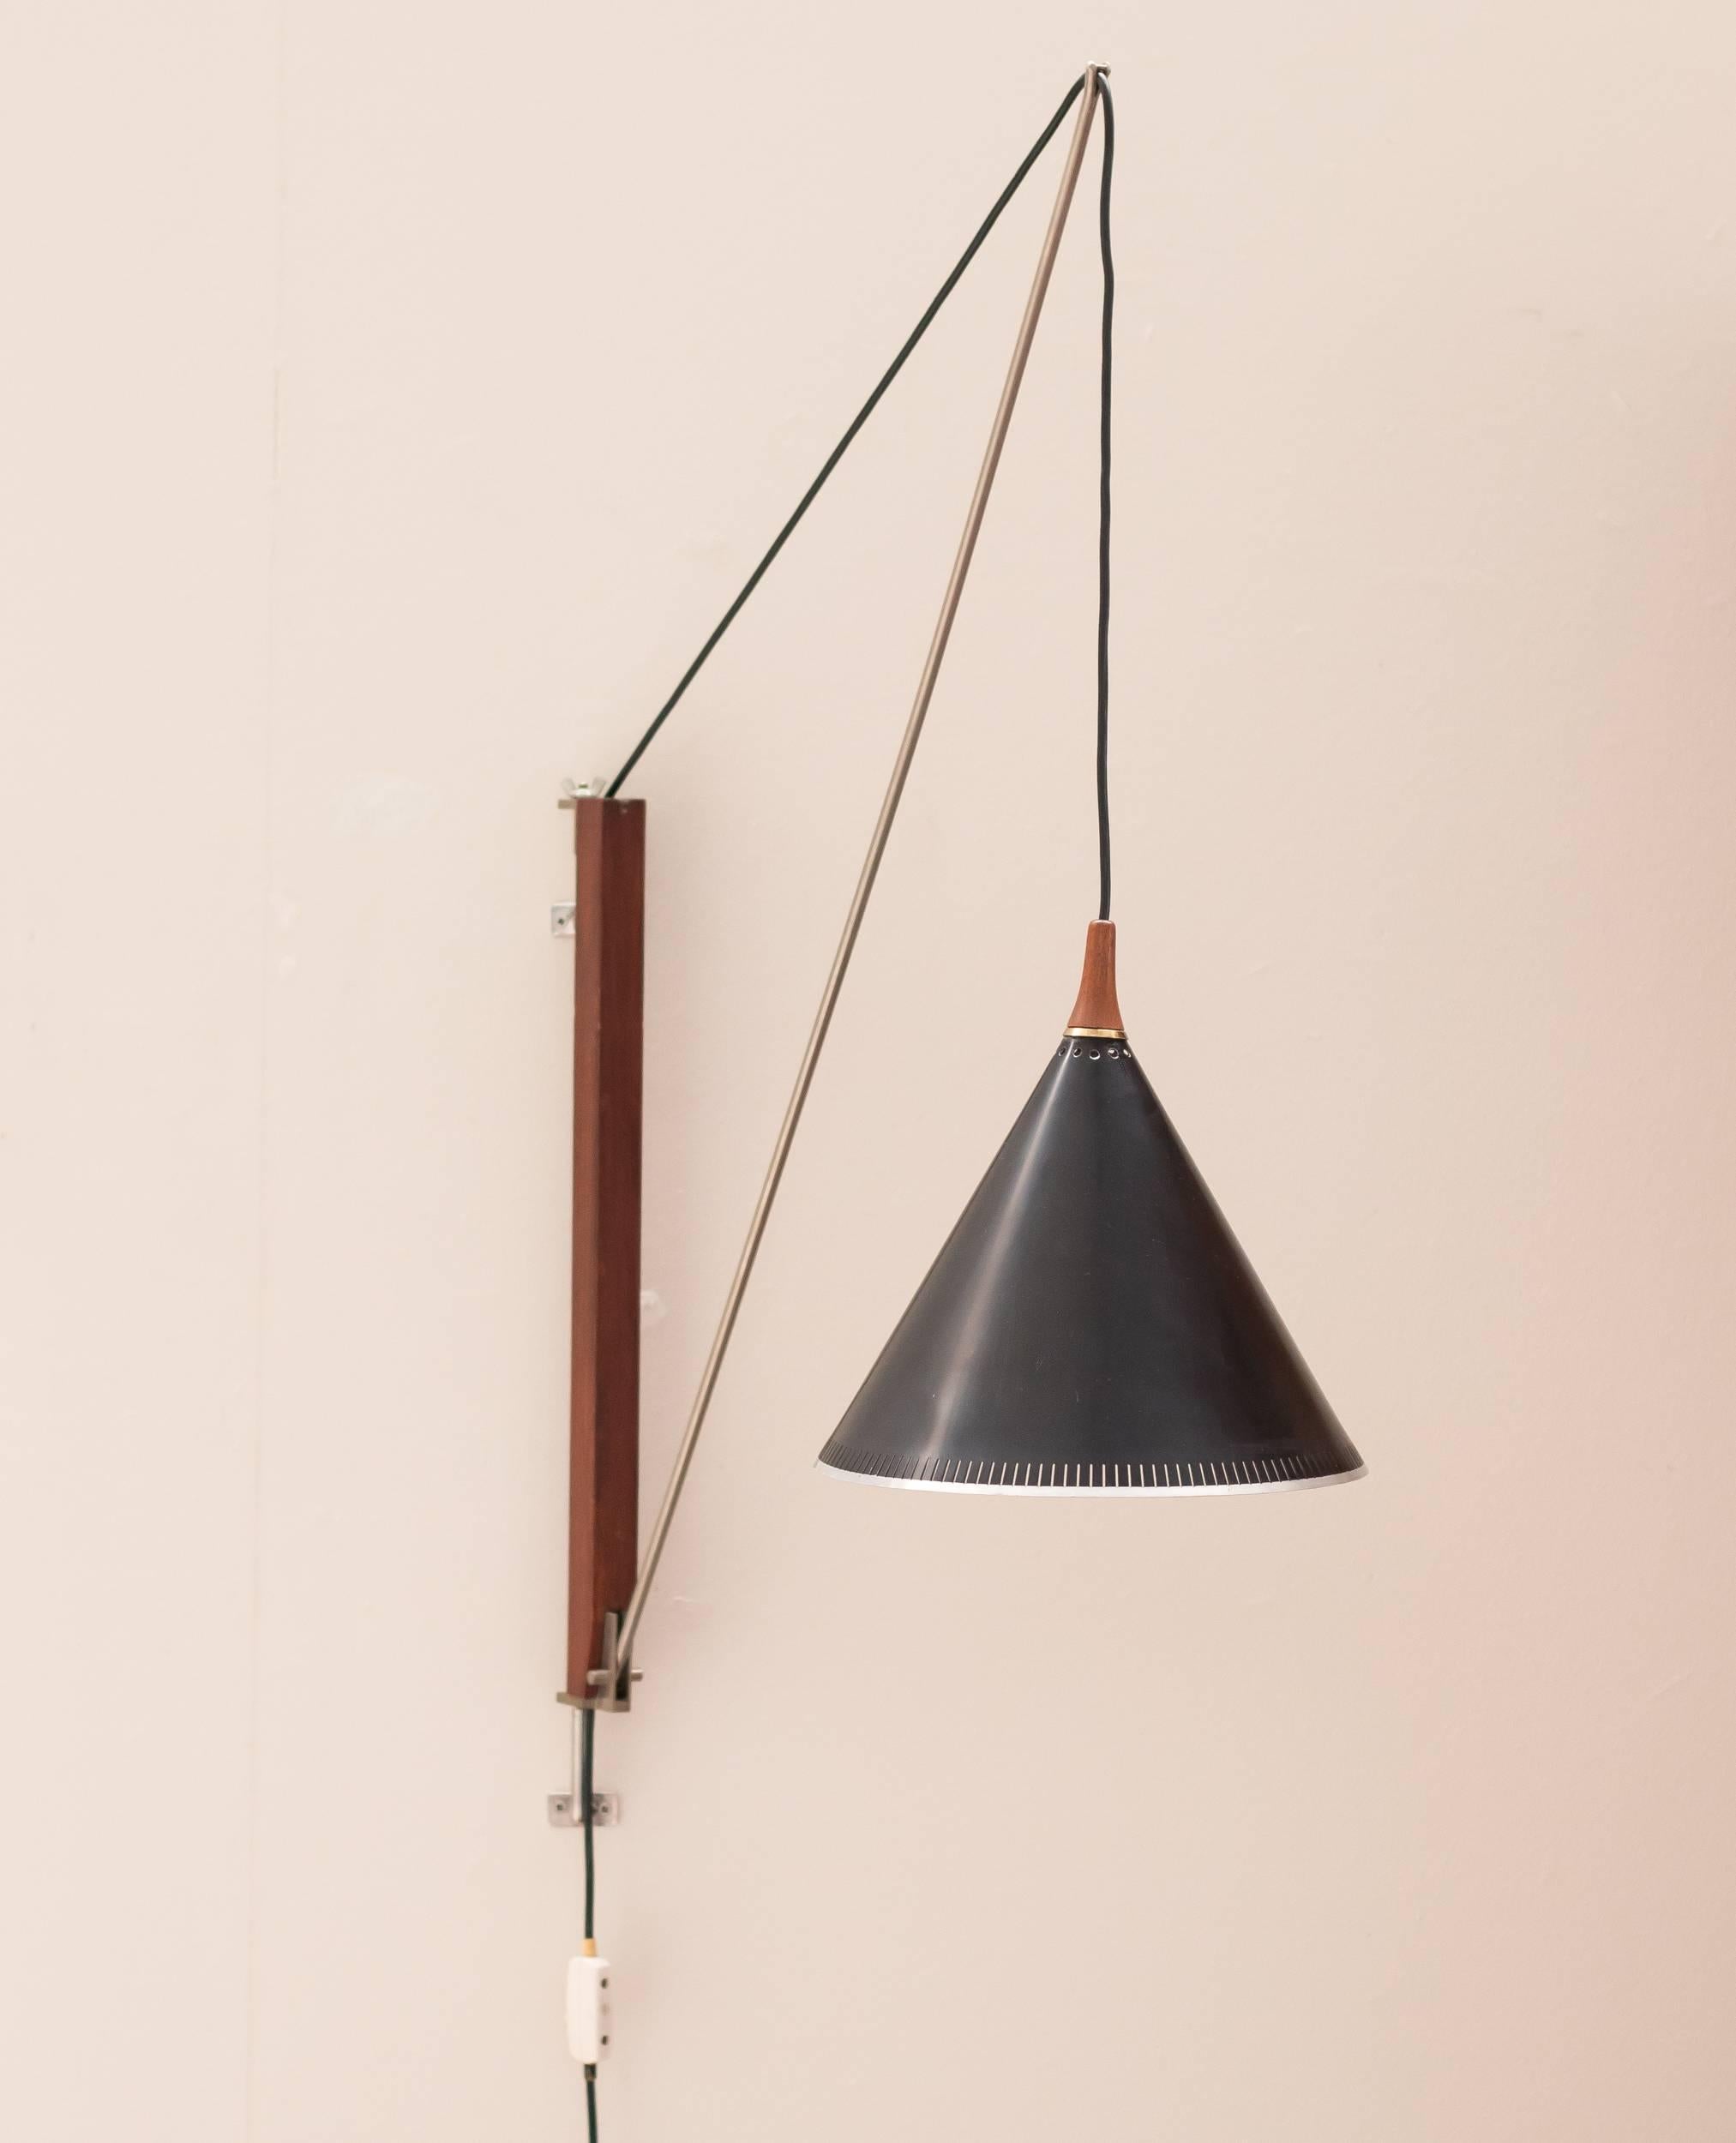 Beautiful arc wall lamp by Dutch designer Willem Hagoort.
Swiveling teak wall mount and adjustable nickel-plated steel arm.
The black enameled steel shade is height adjustable.

Excellent fast and affordable worldwide shipping.
White glove